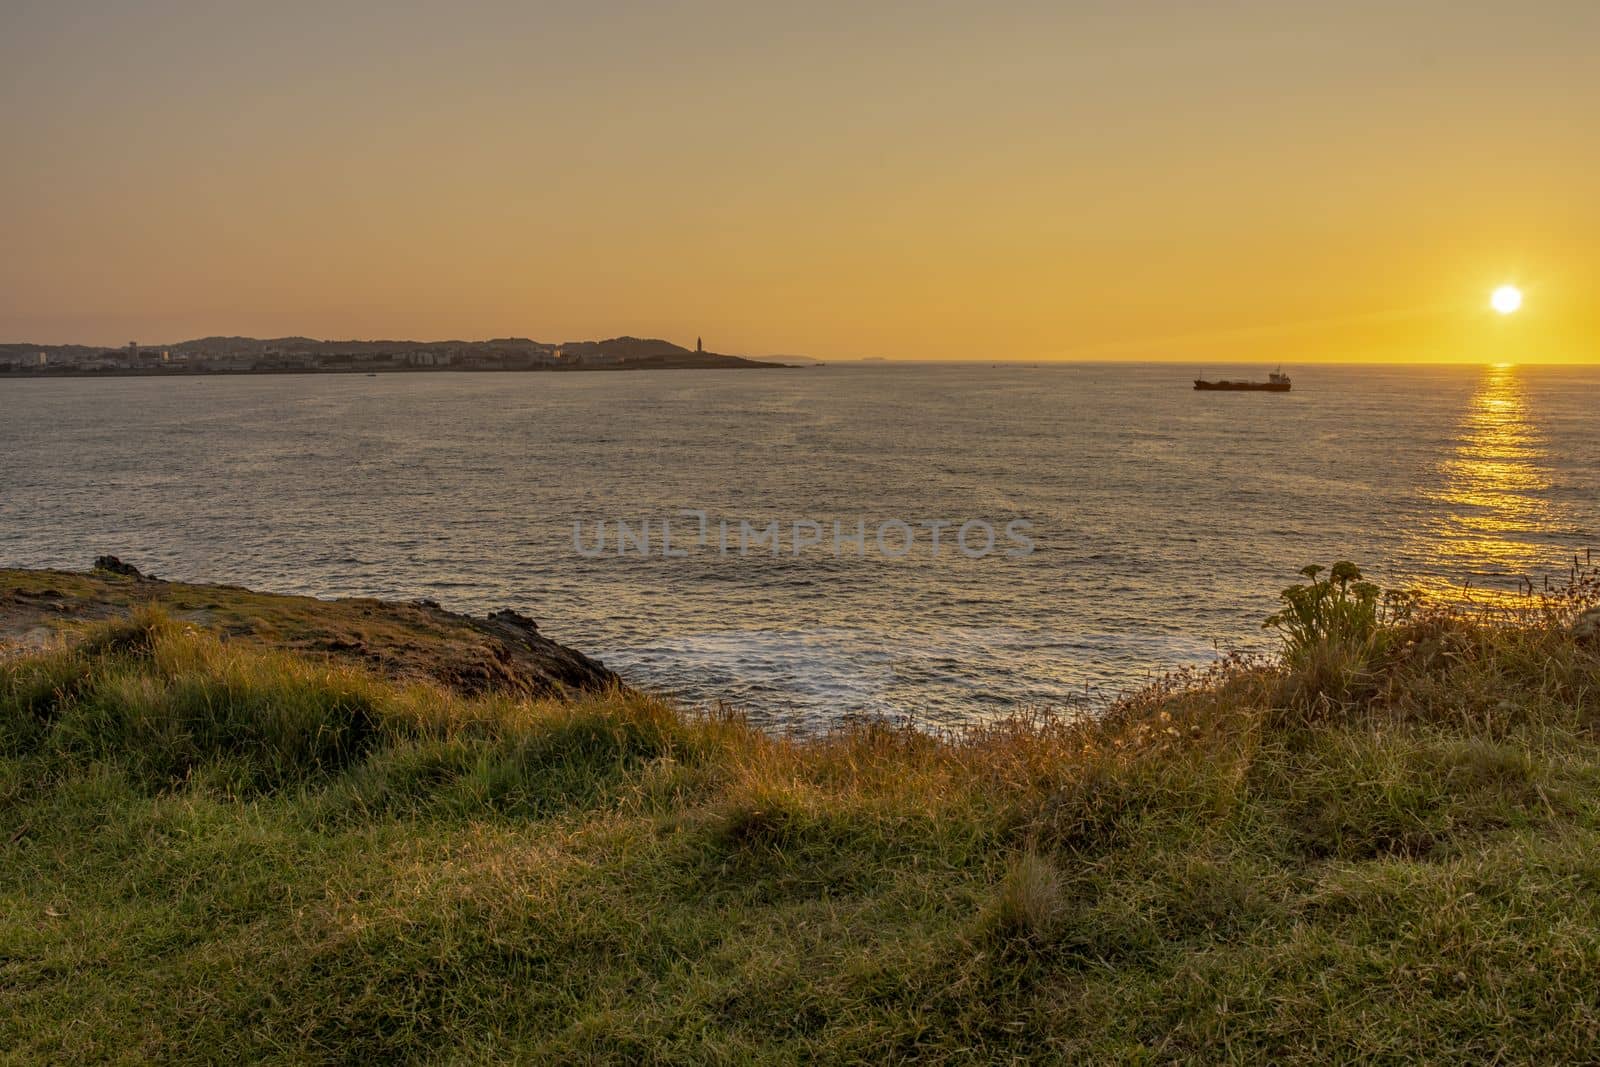 A Coruna sunset with the Atlantic ocean in the background by scasal15